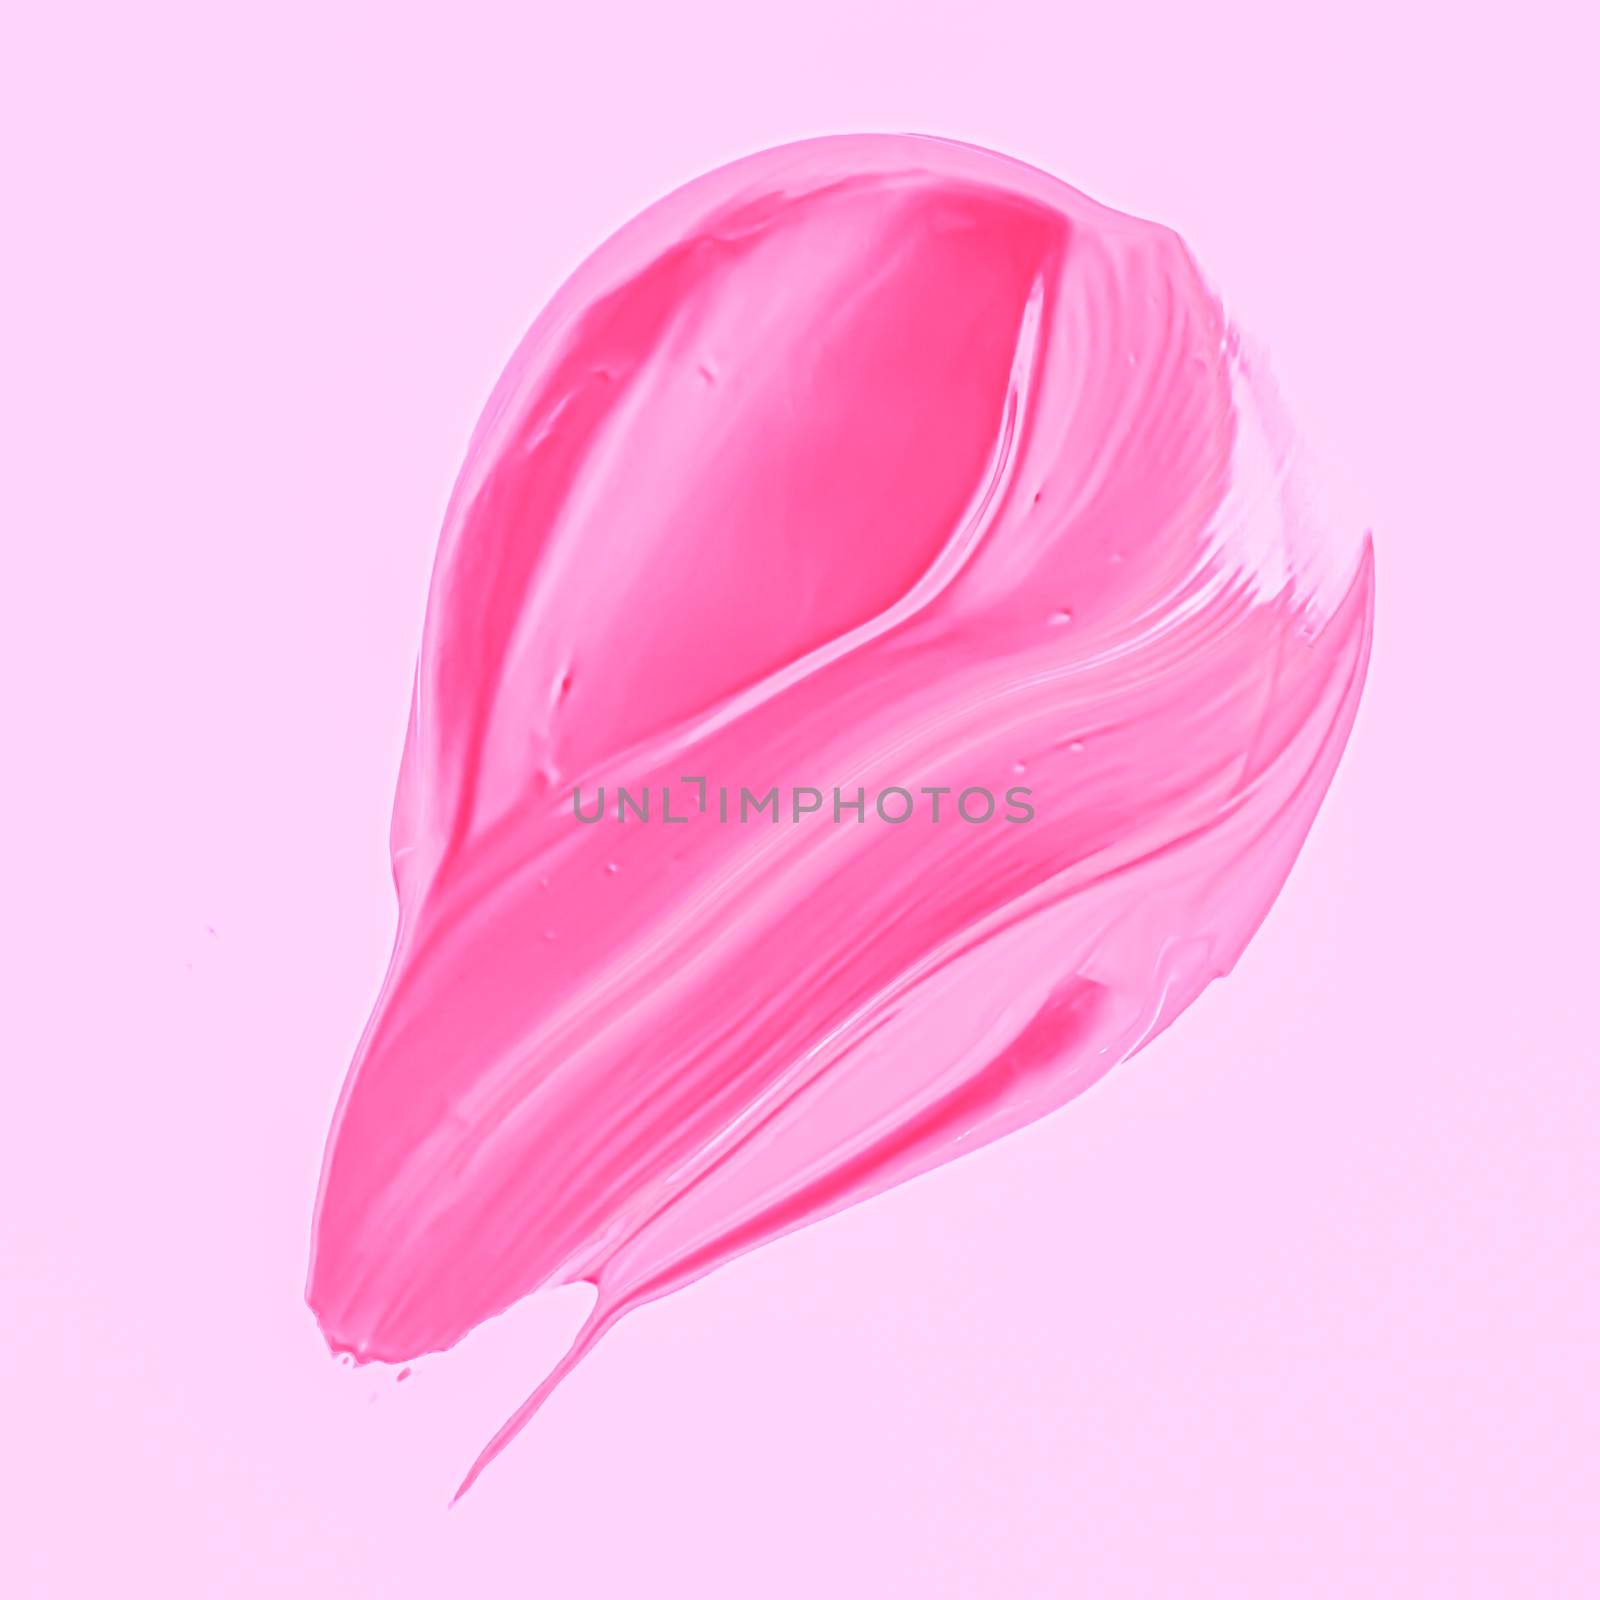 Pink brush stroke or makeup smudge closeup, beauty cosmetics and lipstick textures